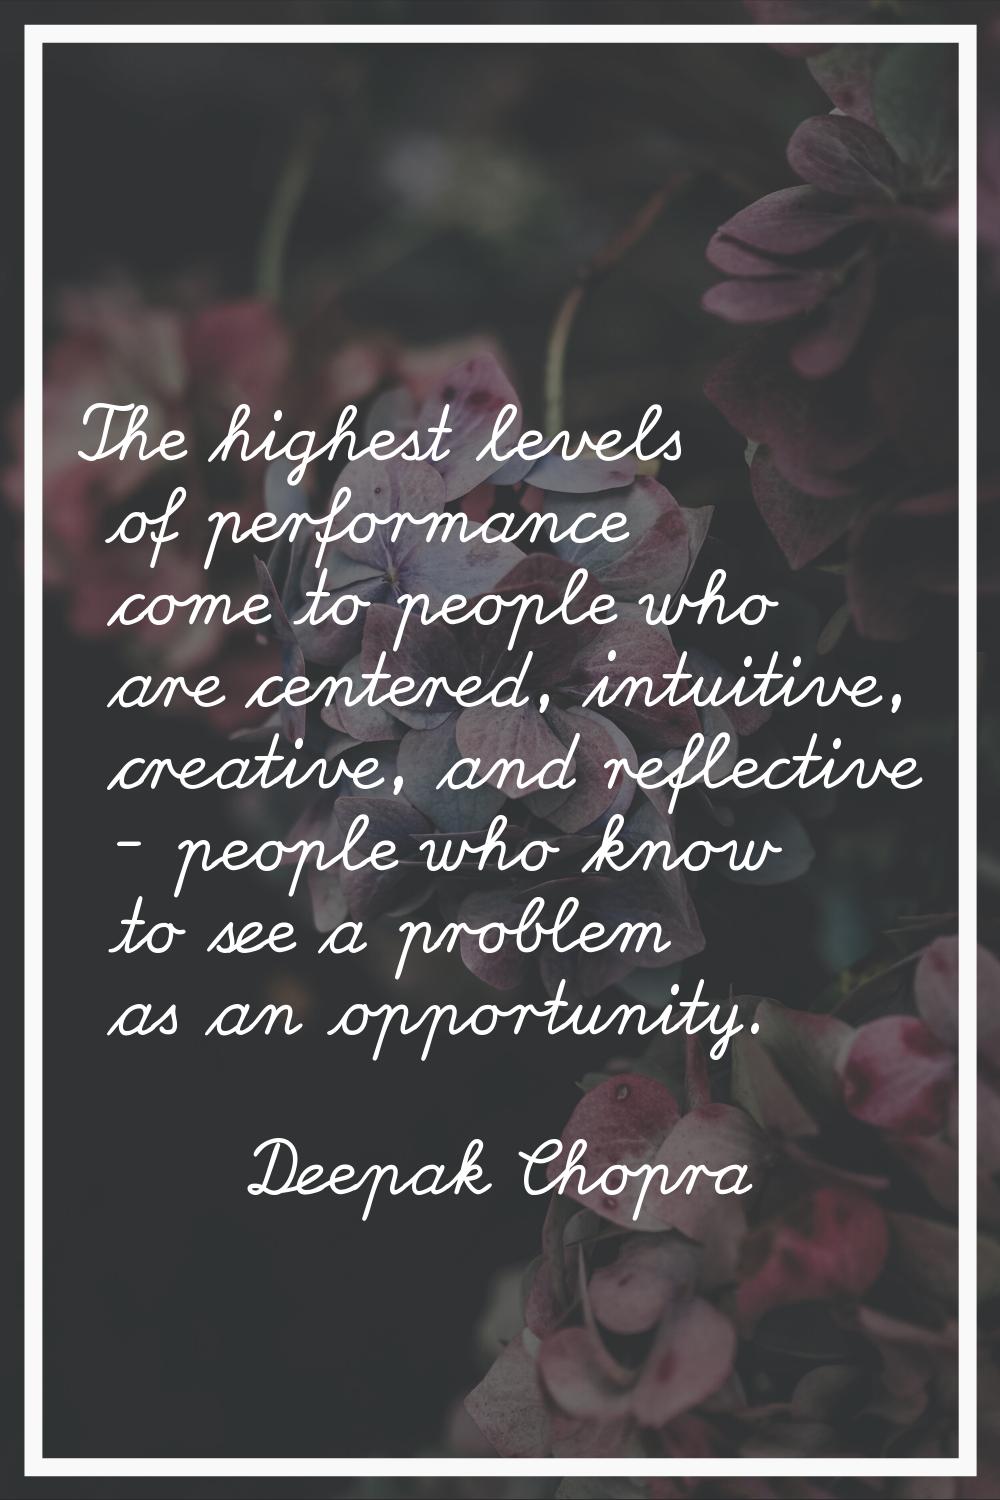 The highest levels of performance come to people who are centered, intuitive, creative, and reflect